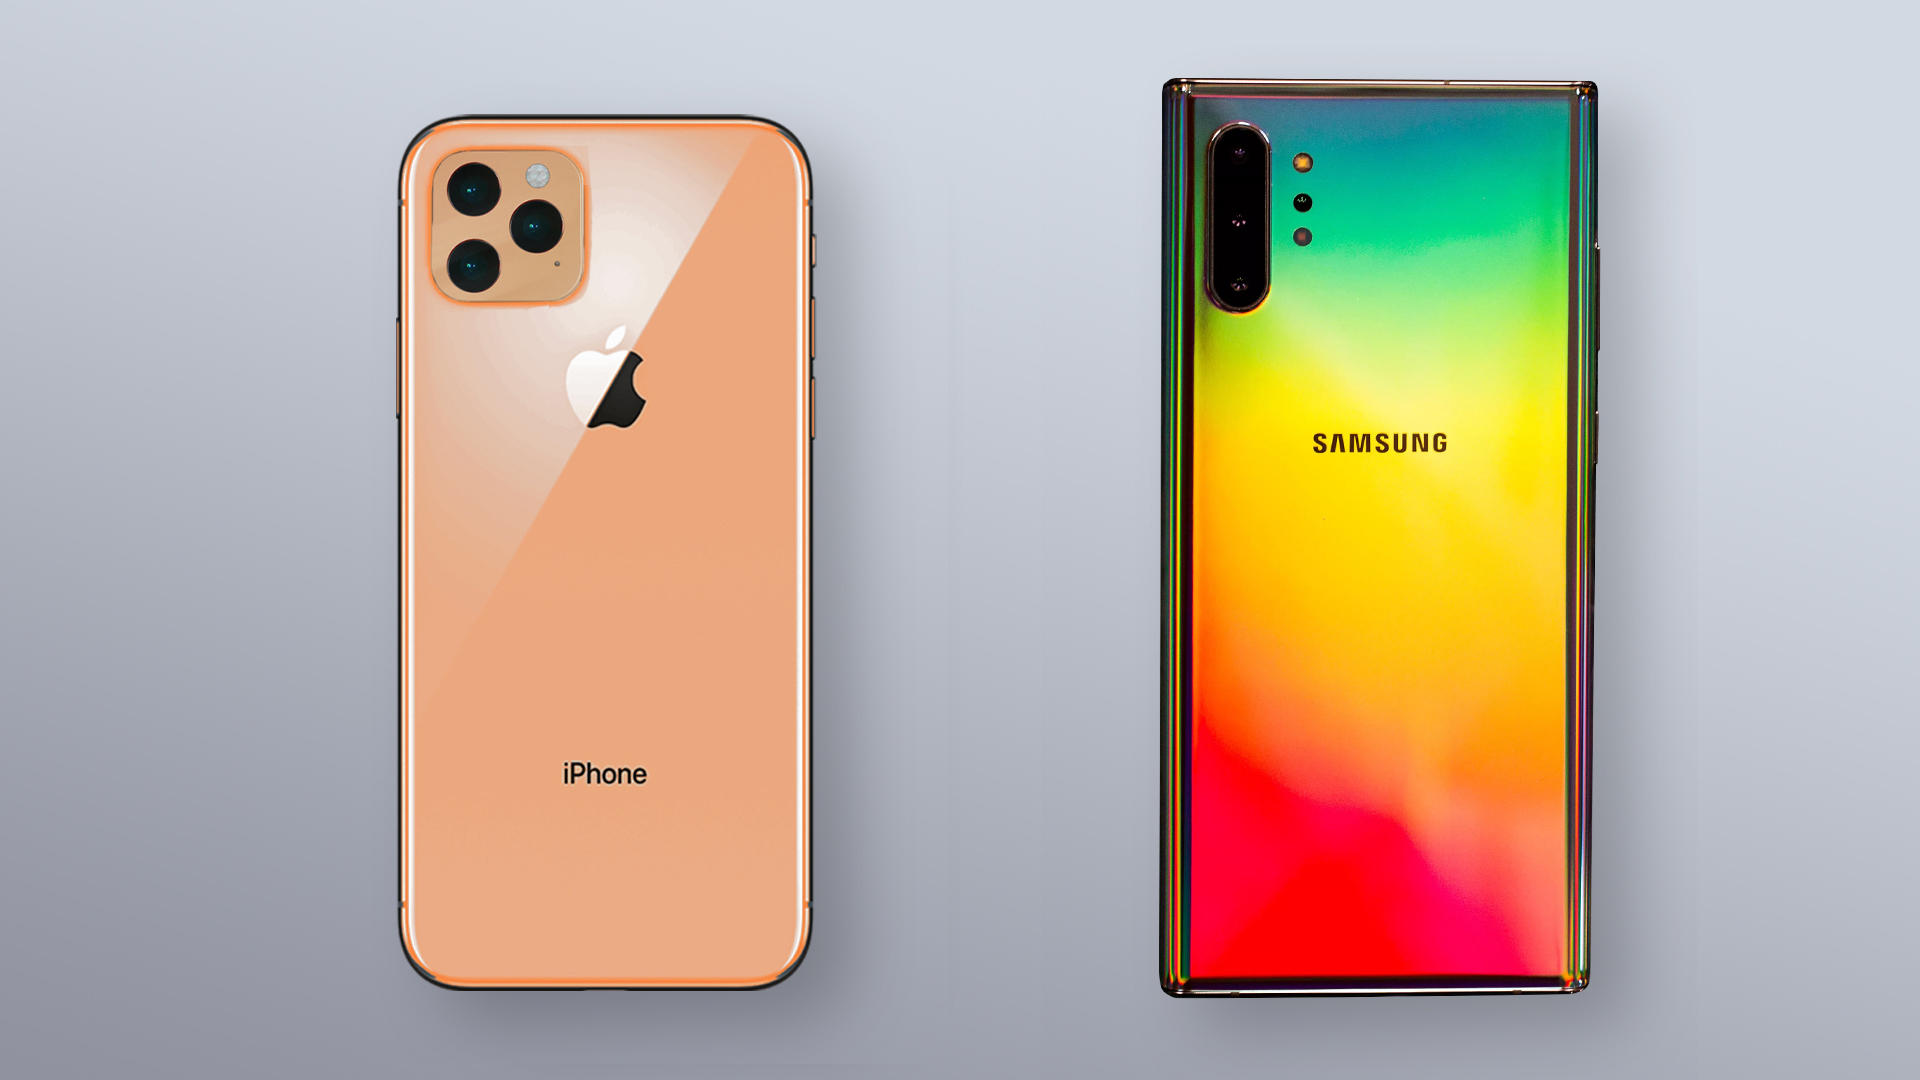 Note 10 vs note 11. Samsung Note 11 Pro. Iphone Galaxy Note 10. Galaxy Note 10 iphone 11. Iphone Note 11 Pro Max.